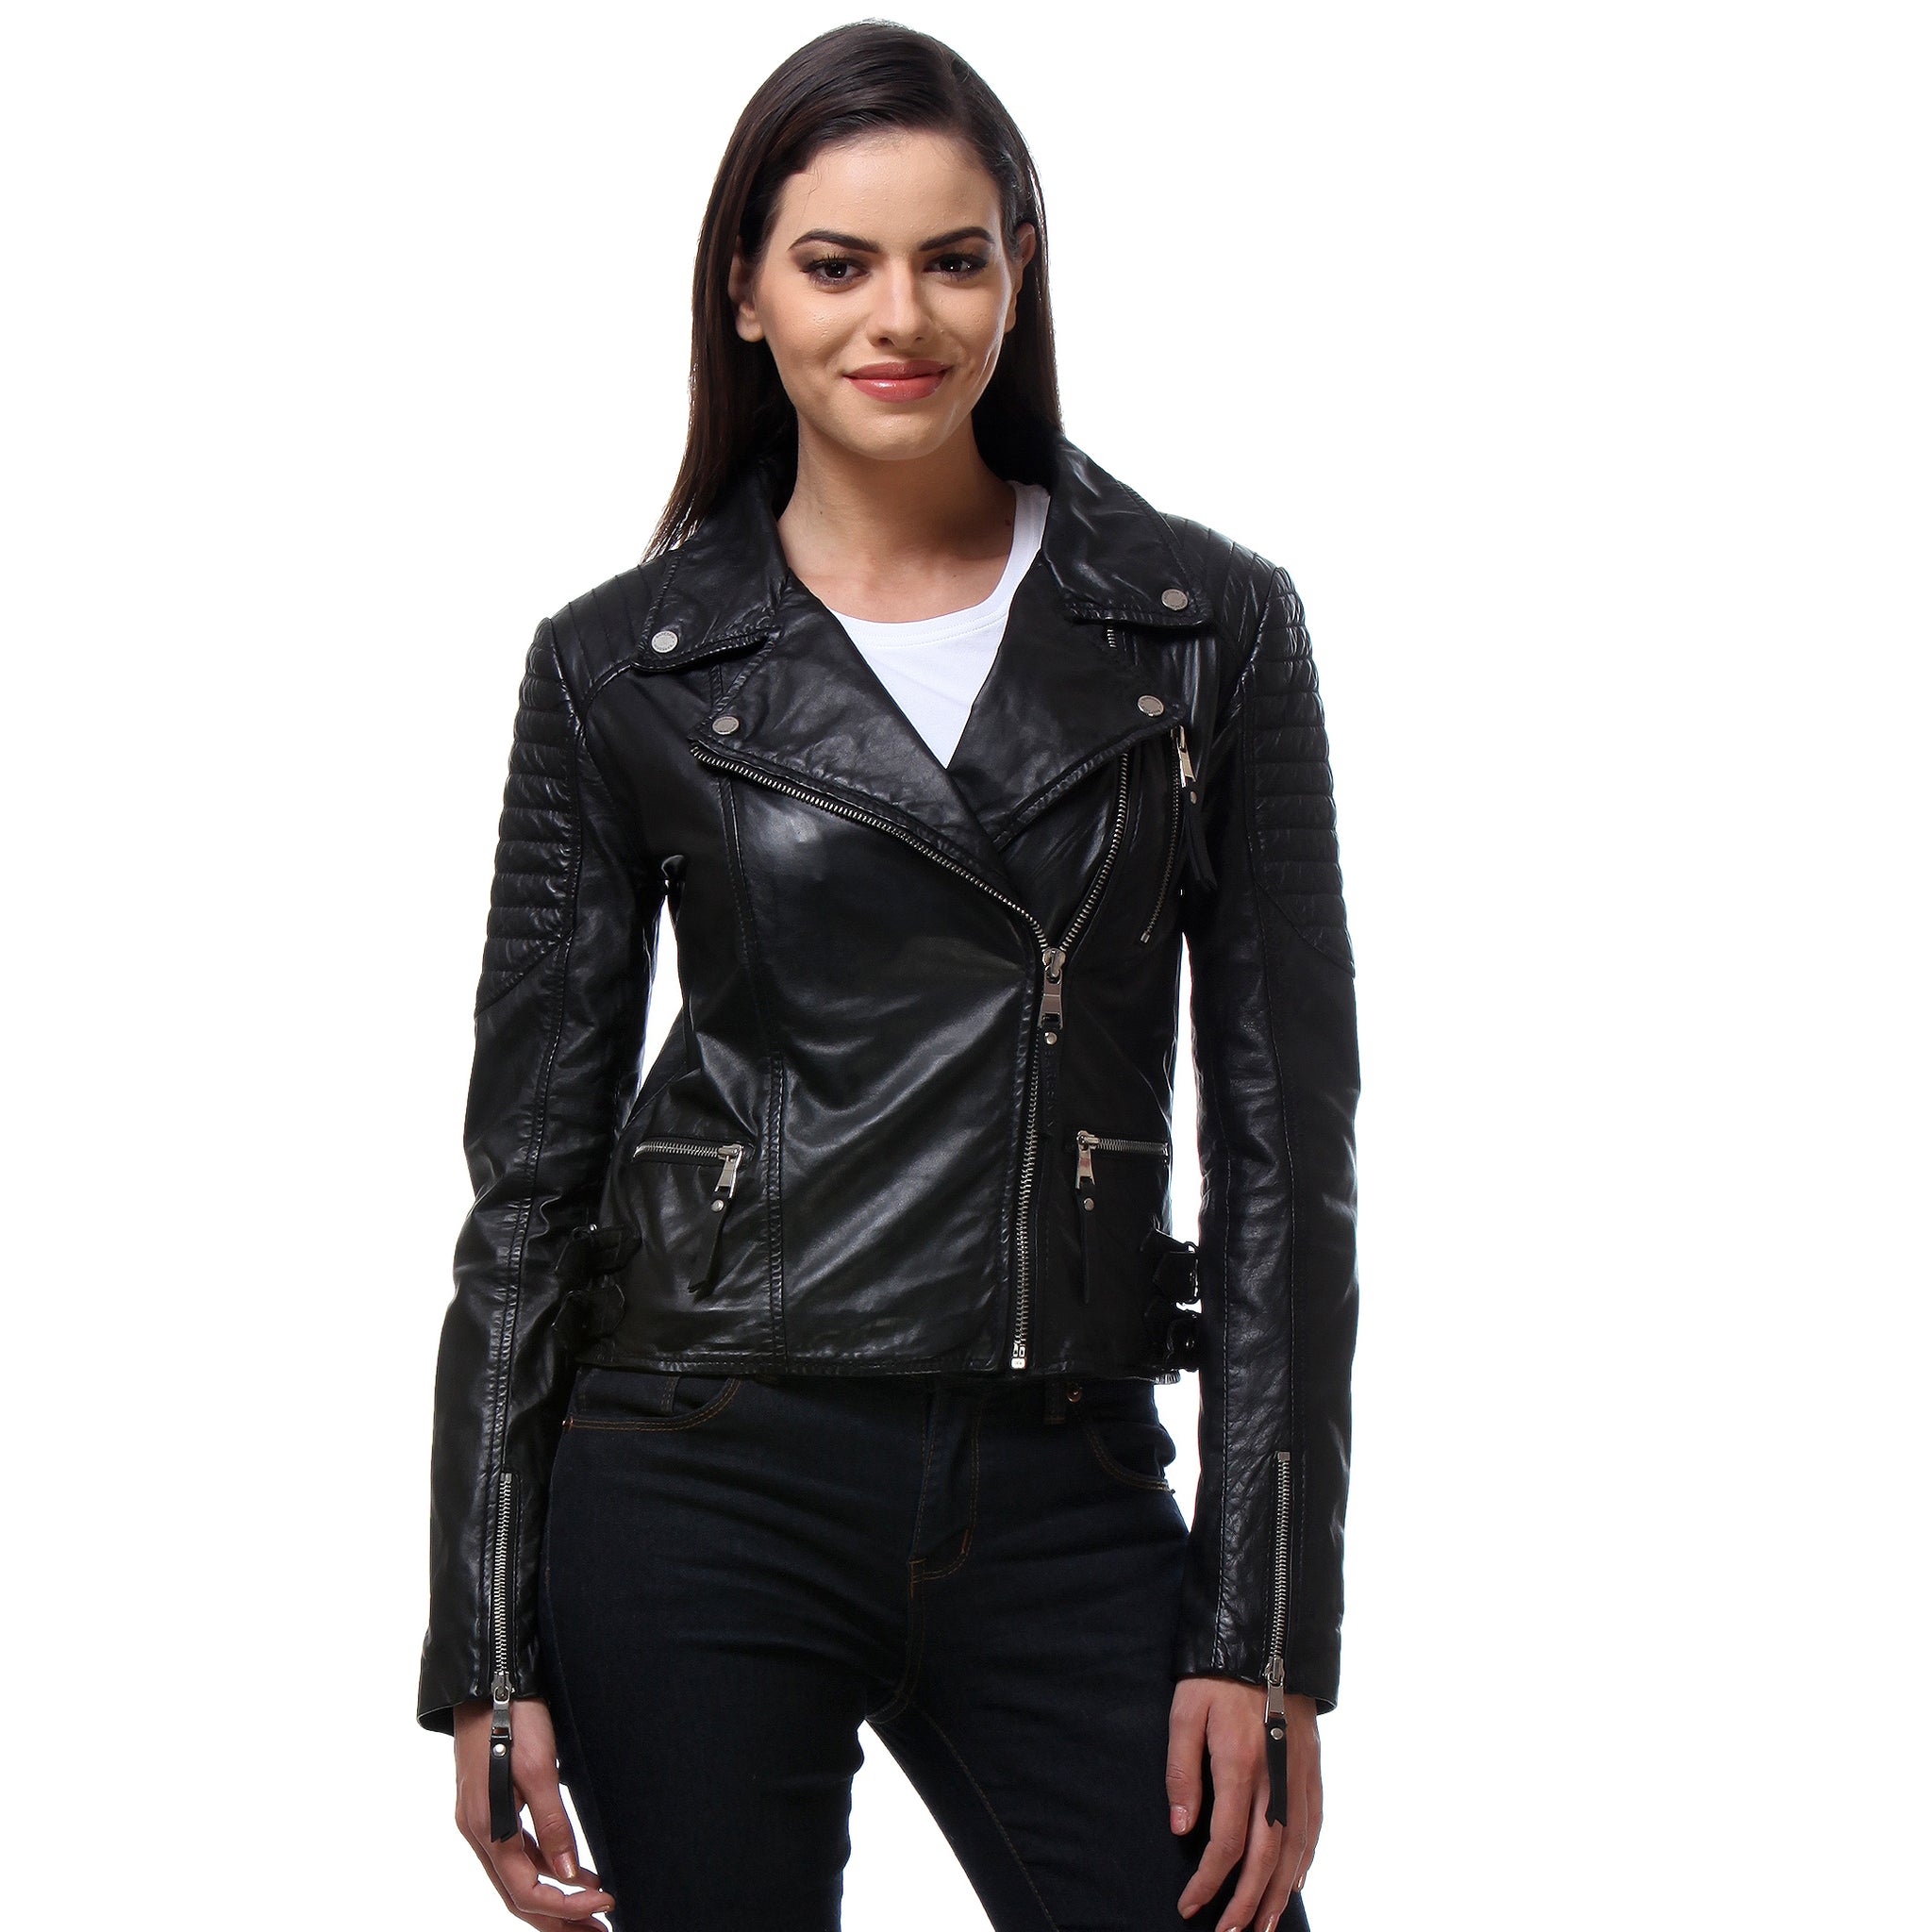 Black Color Classic Biker Jacket In Lamb Uno Leather For Women.